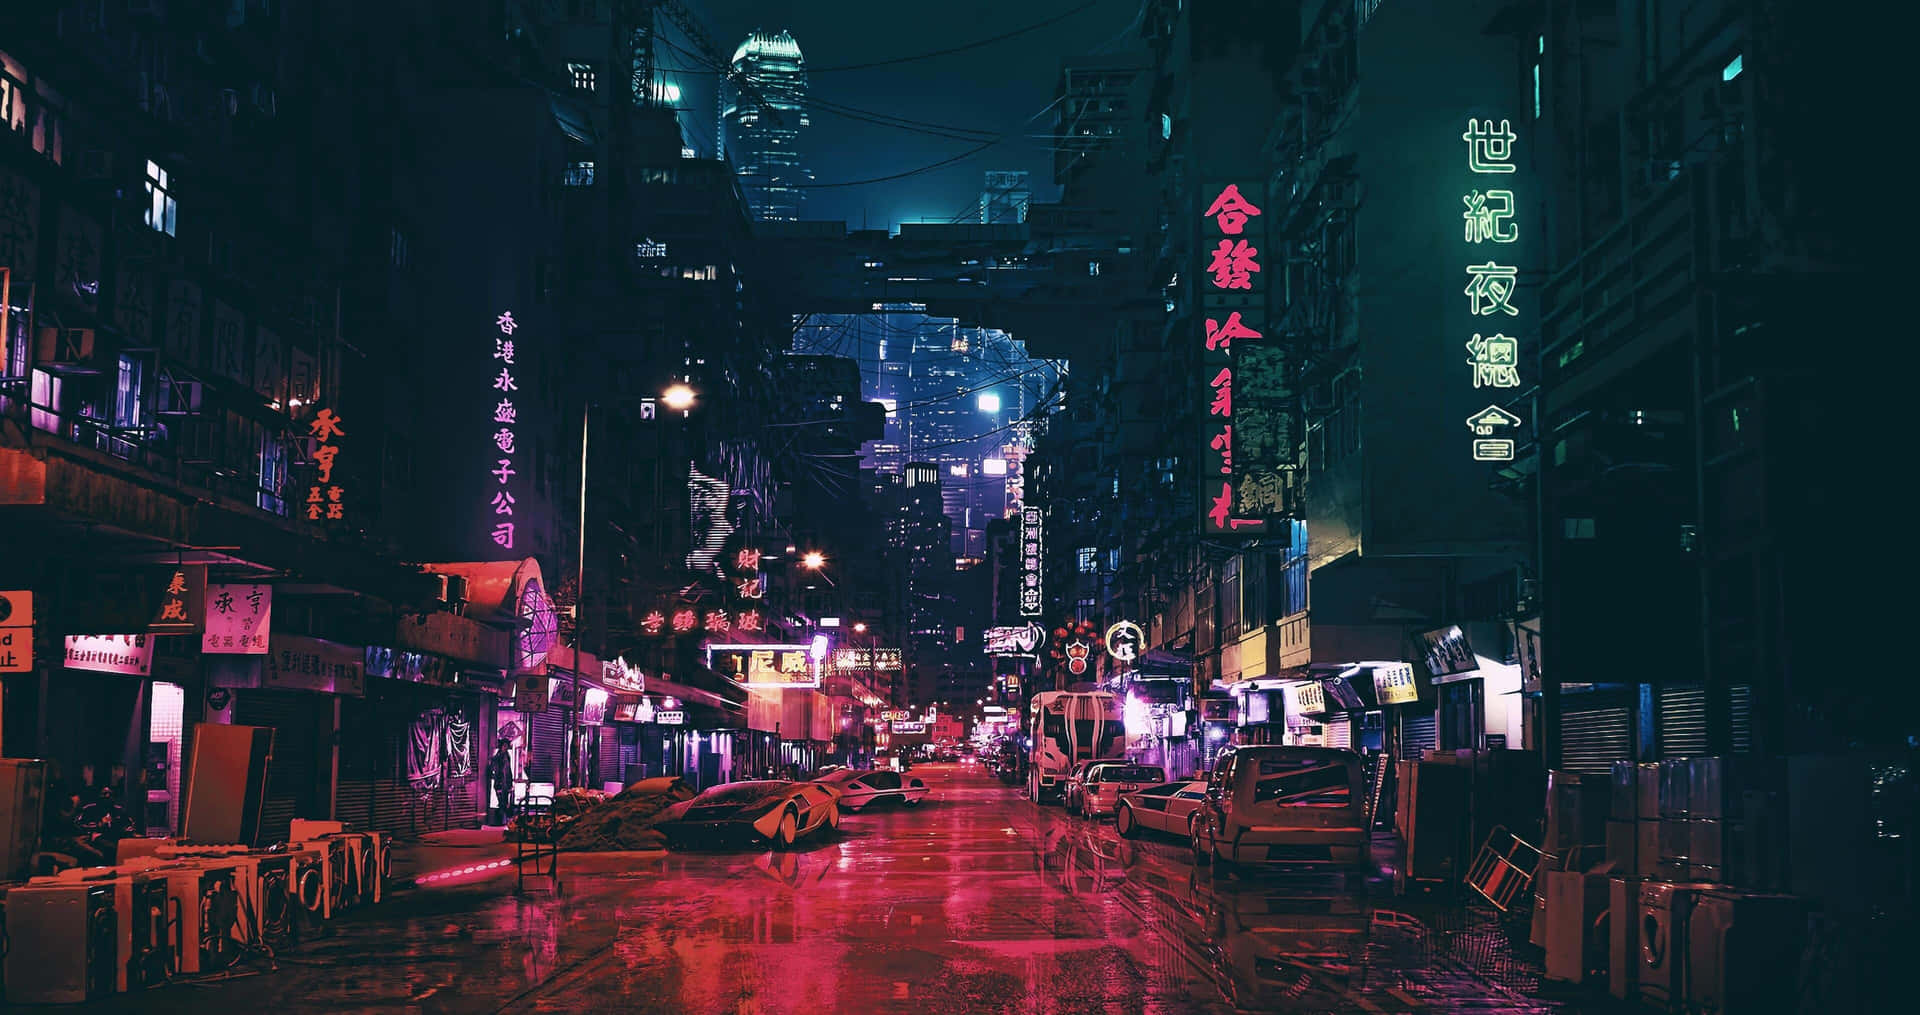 100+] Lo Fi Aesthetic Wallpapers